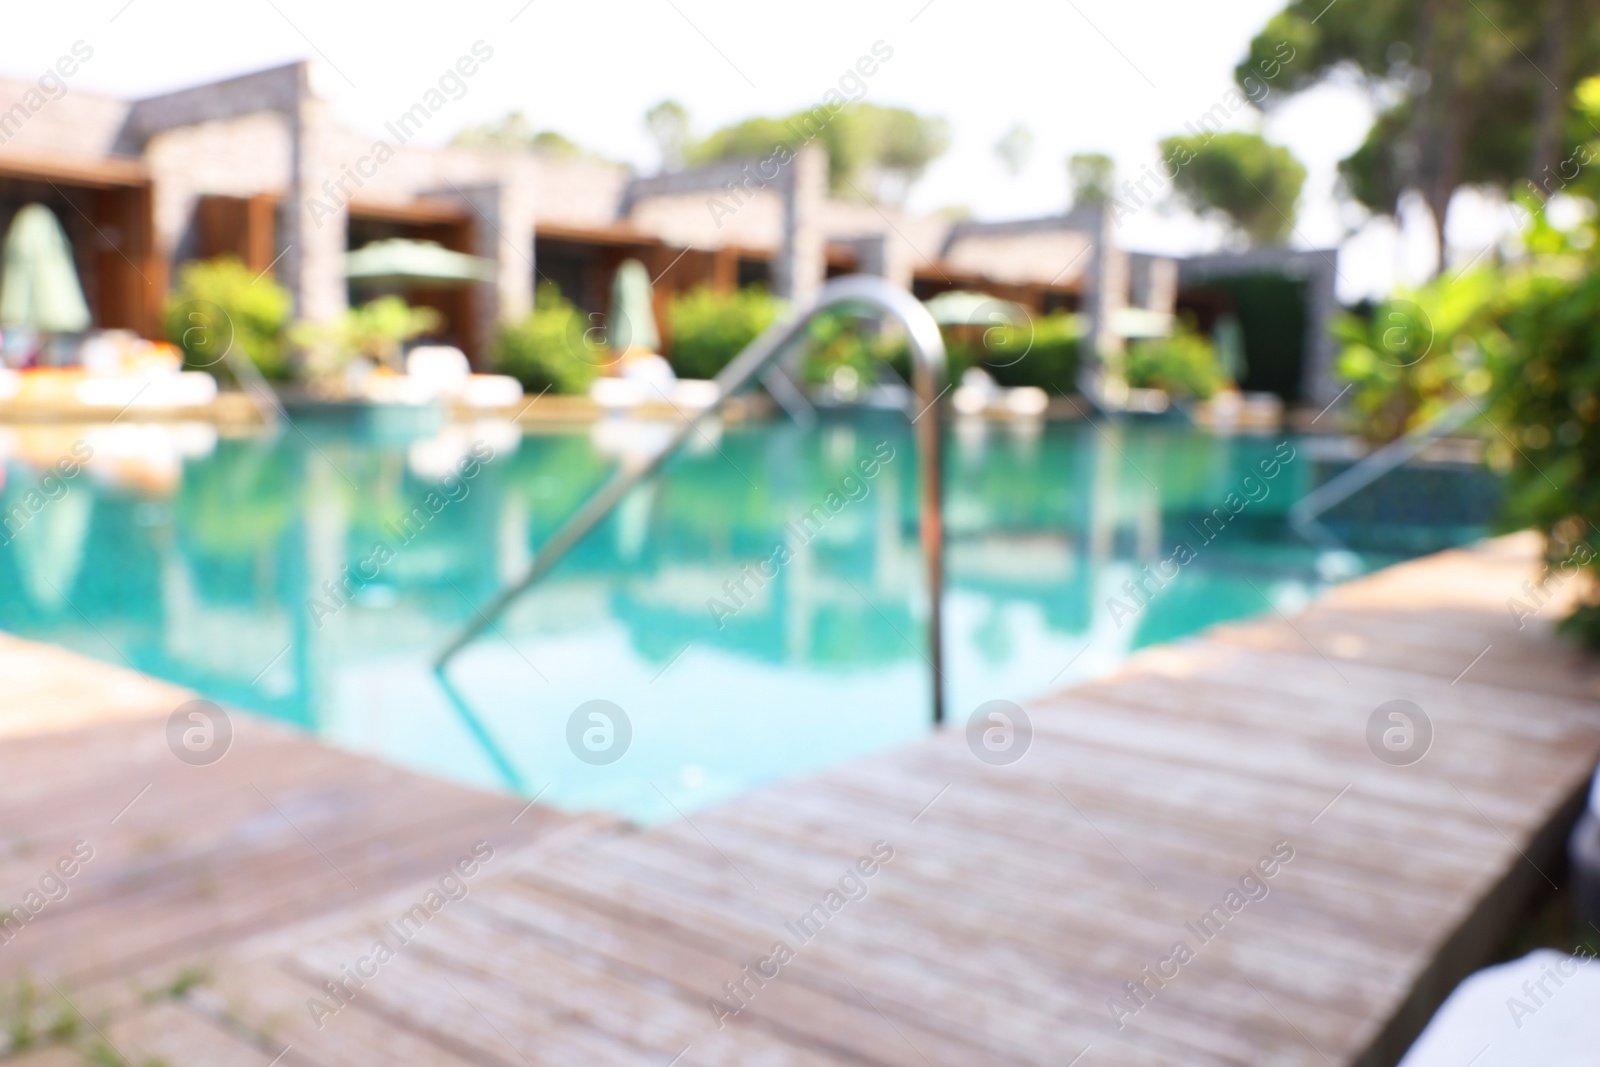 Photo of Outdoor swimming pool with wooden deck, blurred view. Luxury resort